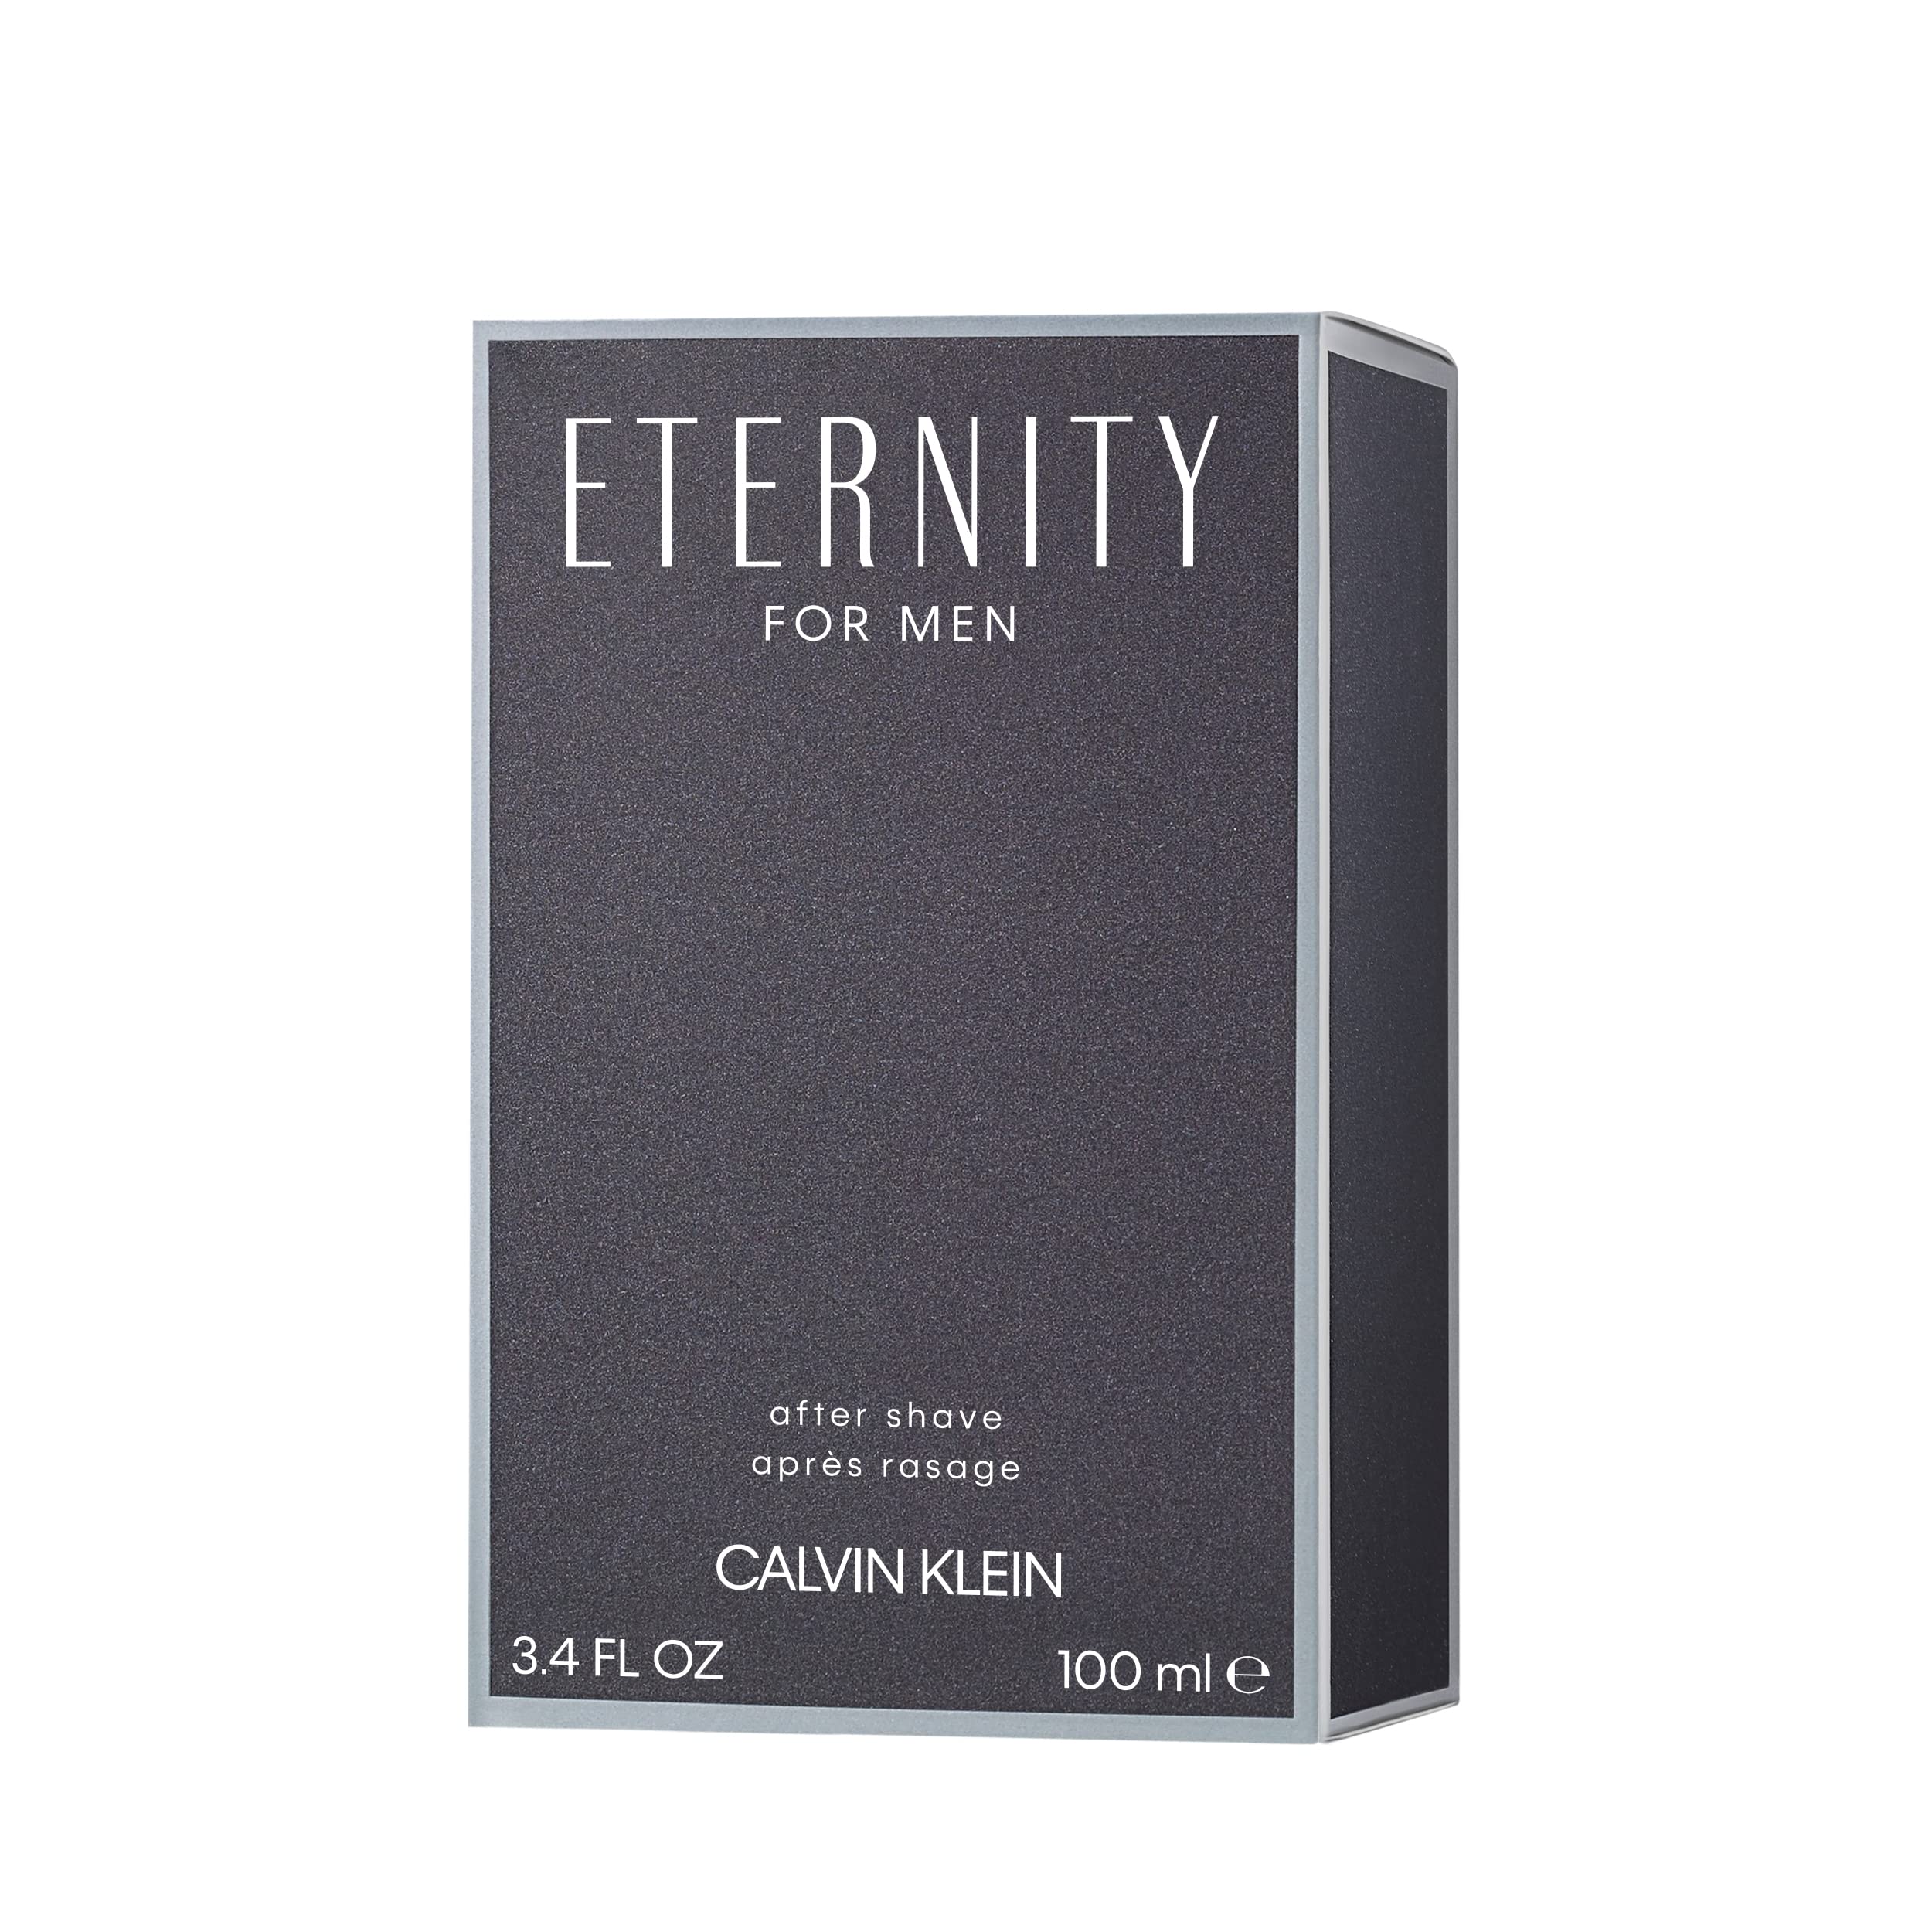 Mua CALVIN KLEIN Eternity After Shave Balm for Men Woody Aromatic Fragrance  Nourishes and Cools After Shaving 100ml trên Amazon Đức chính hãng 2023 |  Fado